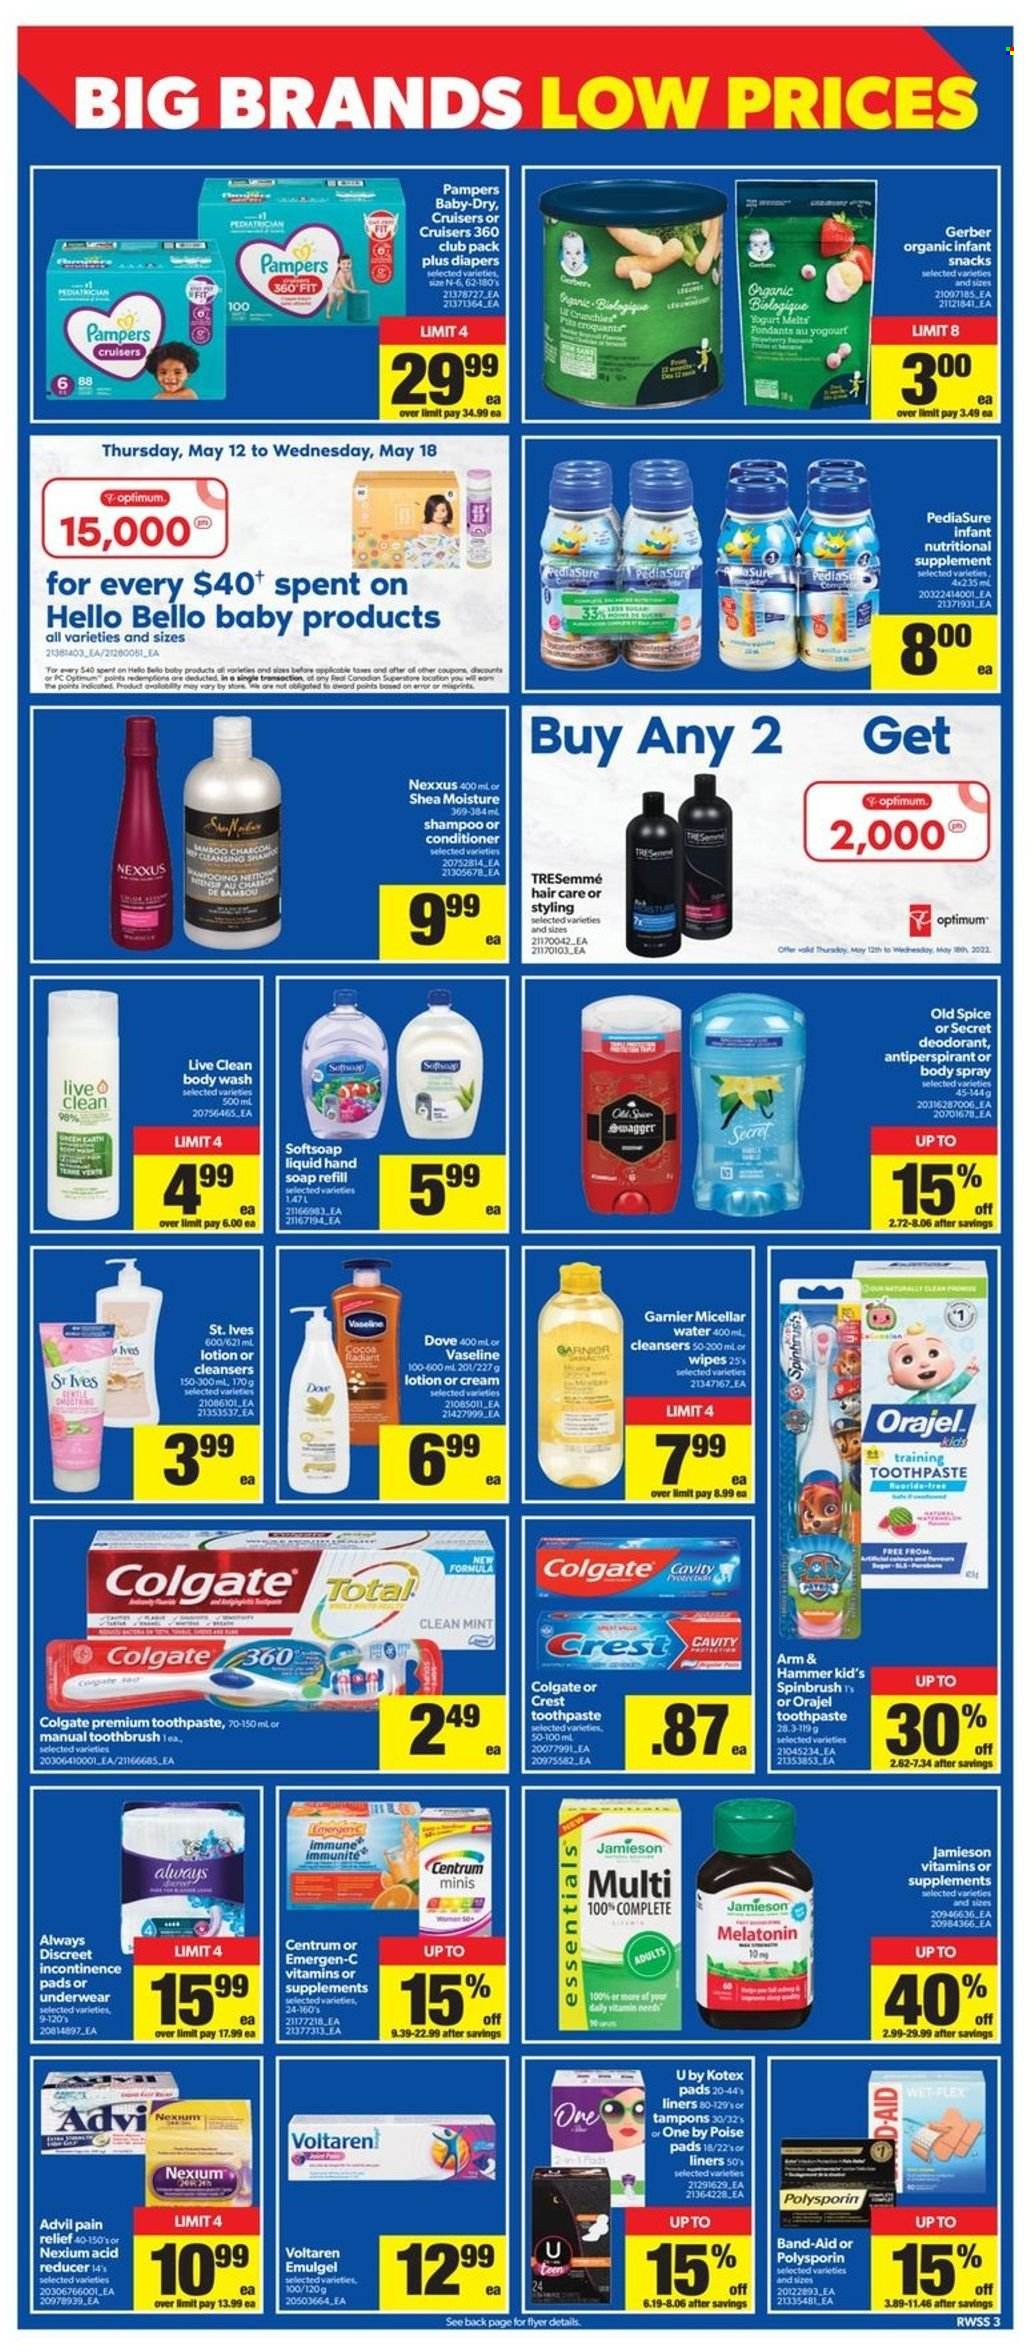 thumbnail - Circulaire Real Canadian Superstore - 12 Mai 2022 - 18 Mai 2022 - Produits soldés - pain, Dove, shampooing, Always, Garnier, desodorisant, déodorant, bambou, Discreet, Colgate, Voltaren, Old Spice, Pampers. Page 4.